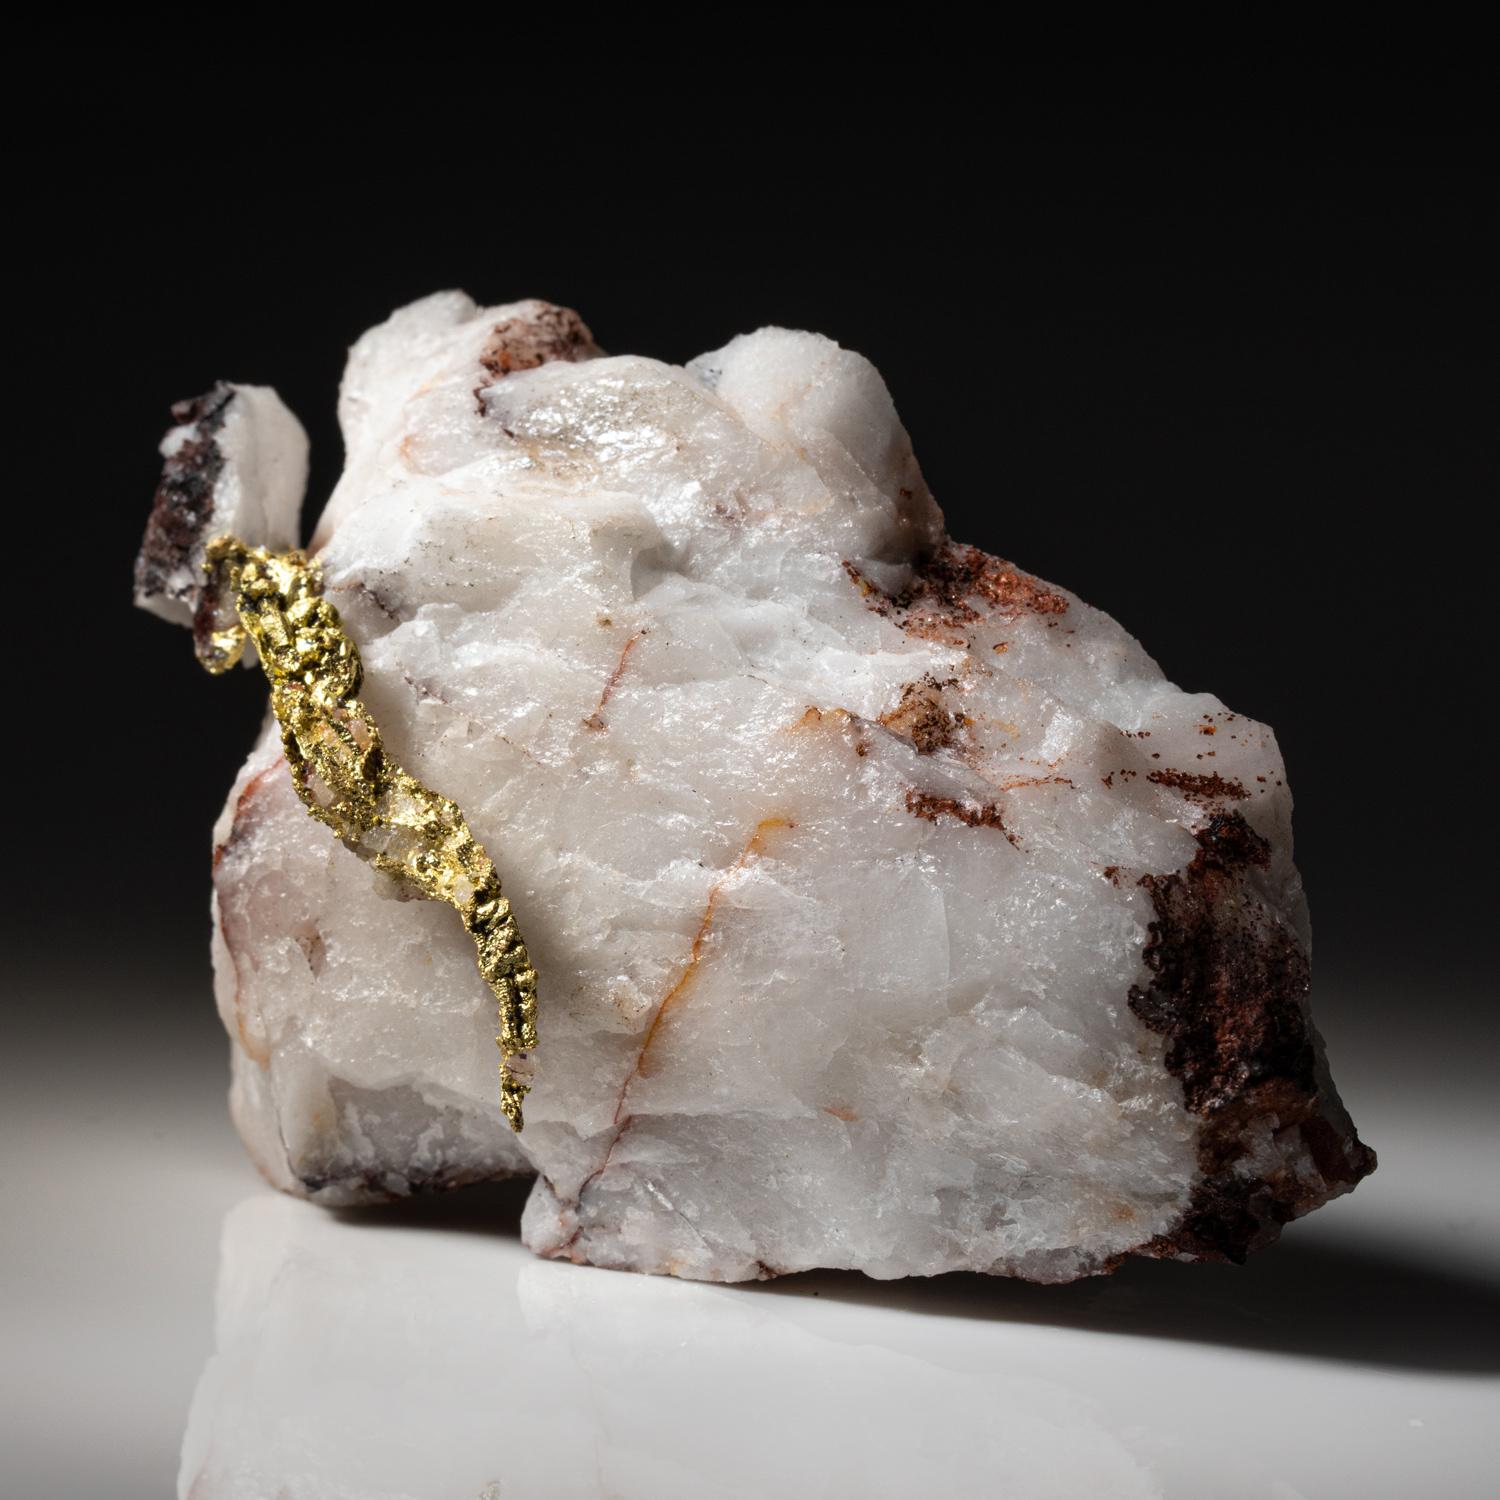 from Aouint Ighoman, Assa-Zag Province, Guelmim-Oued Noun Region, Morocco

 

Well crystallized gold specimen with spinel-law twinning on all sides. The gold is perched atop a quartz matrix. Lustrous rich golden yellow luster. New find from 2021.

